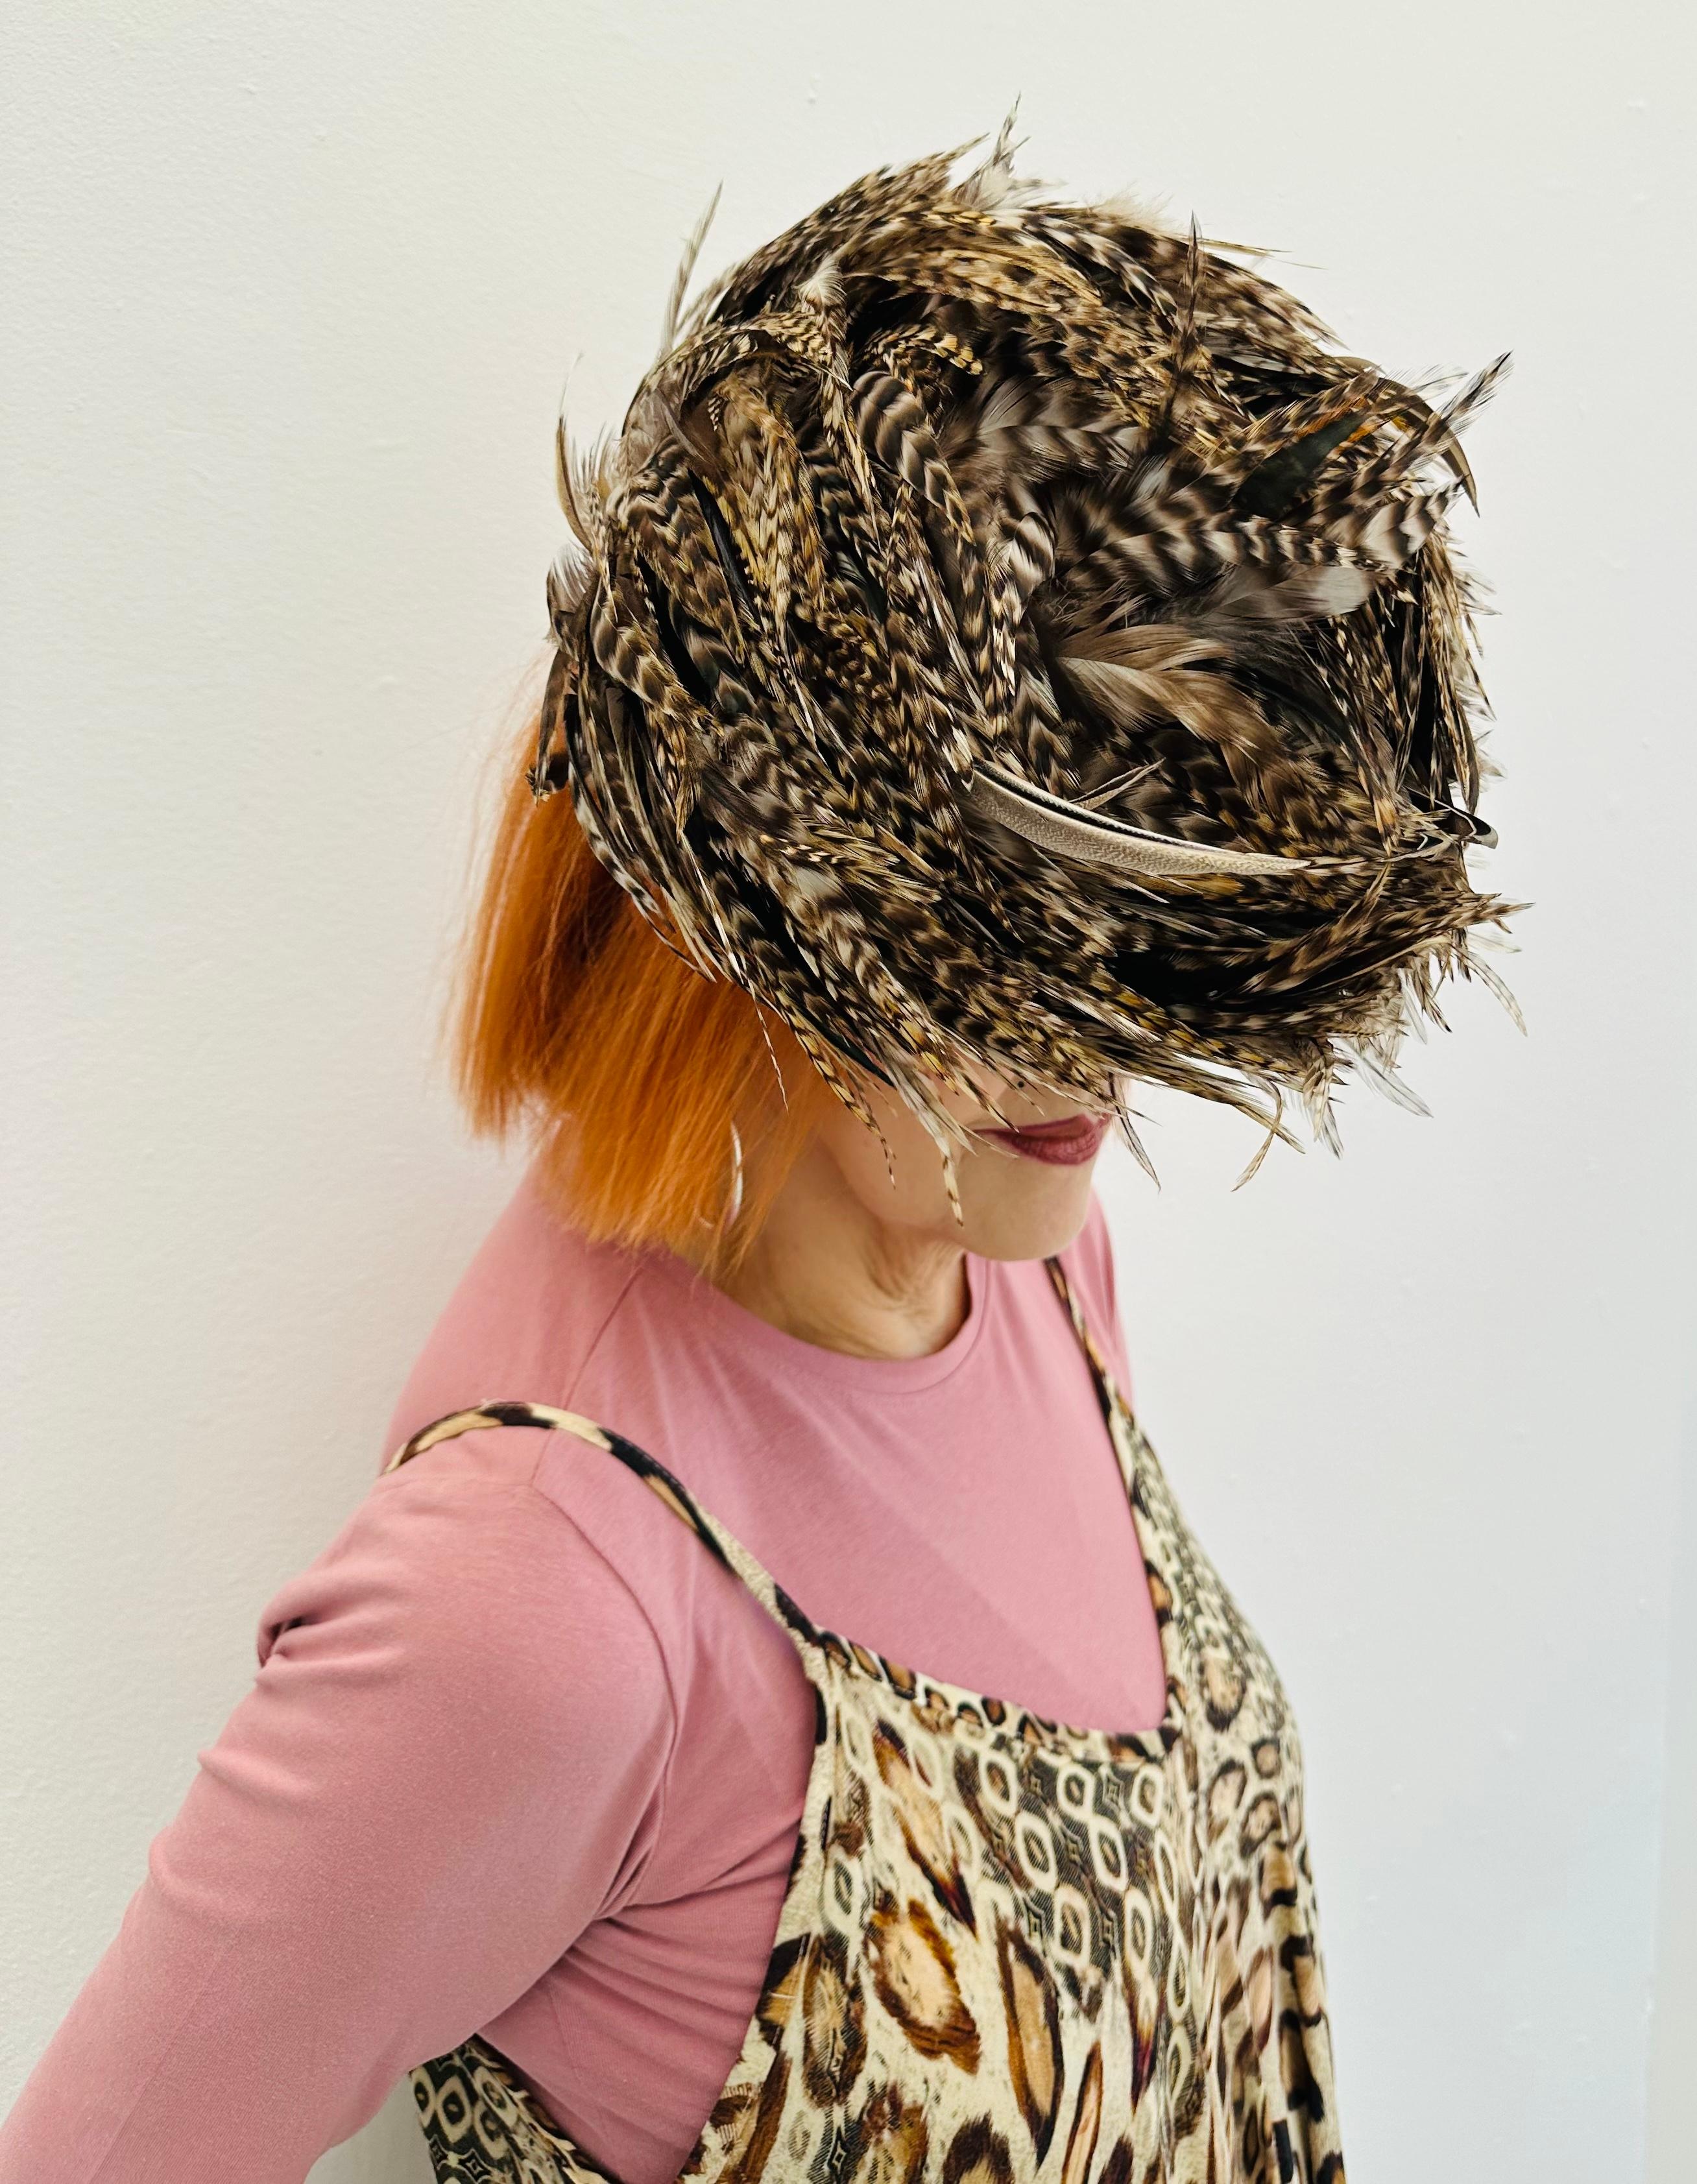 Vintage 1998 Philip Treacy Bespoke Unused Pheasant Feather Fascinator Hat  In Good Condition For Sale In London, GB